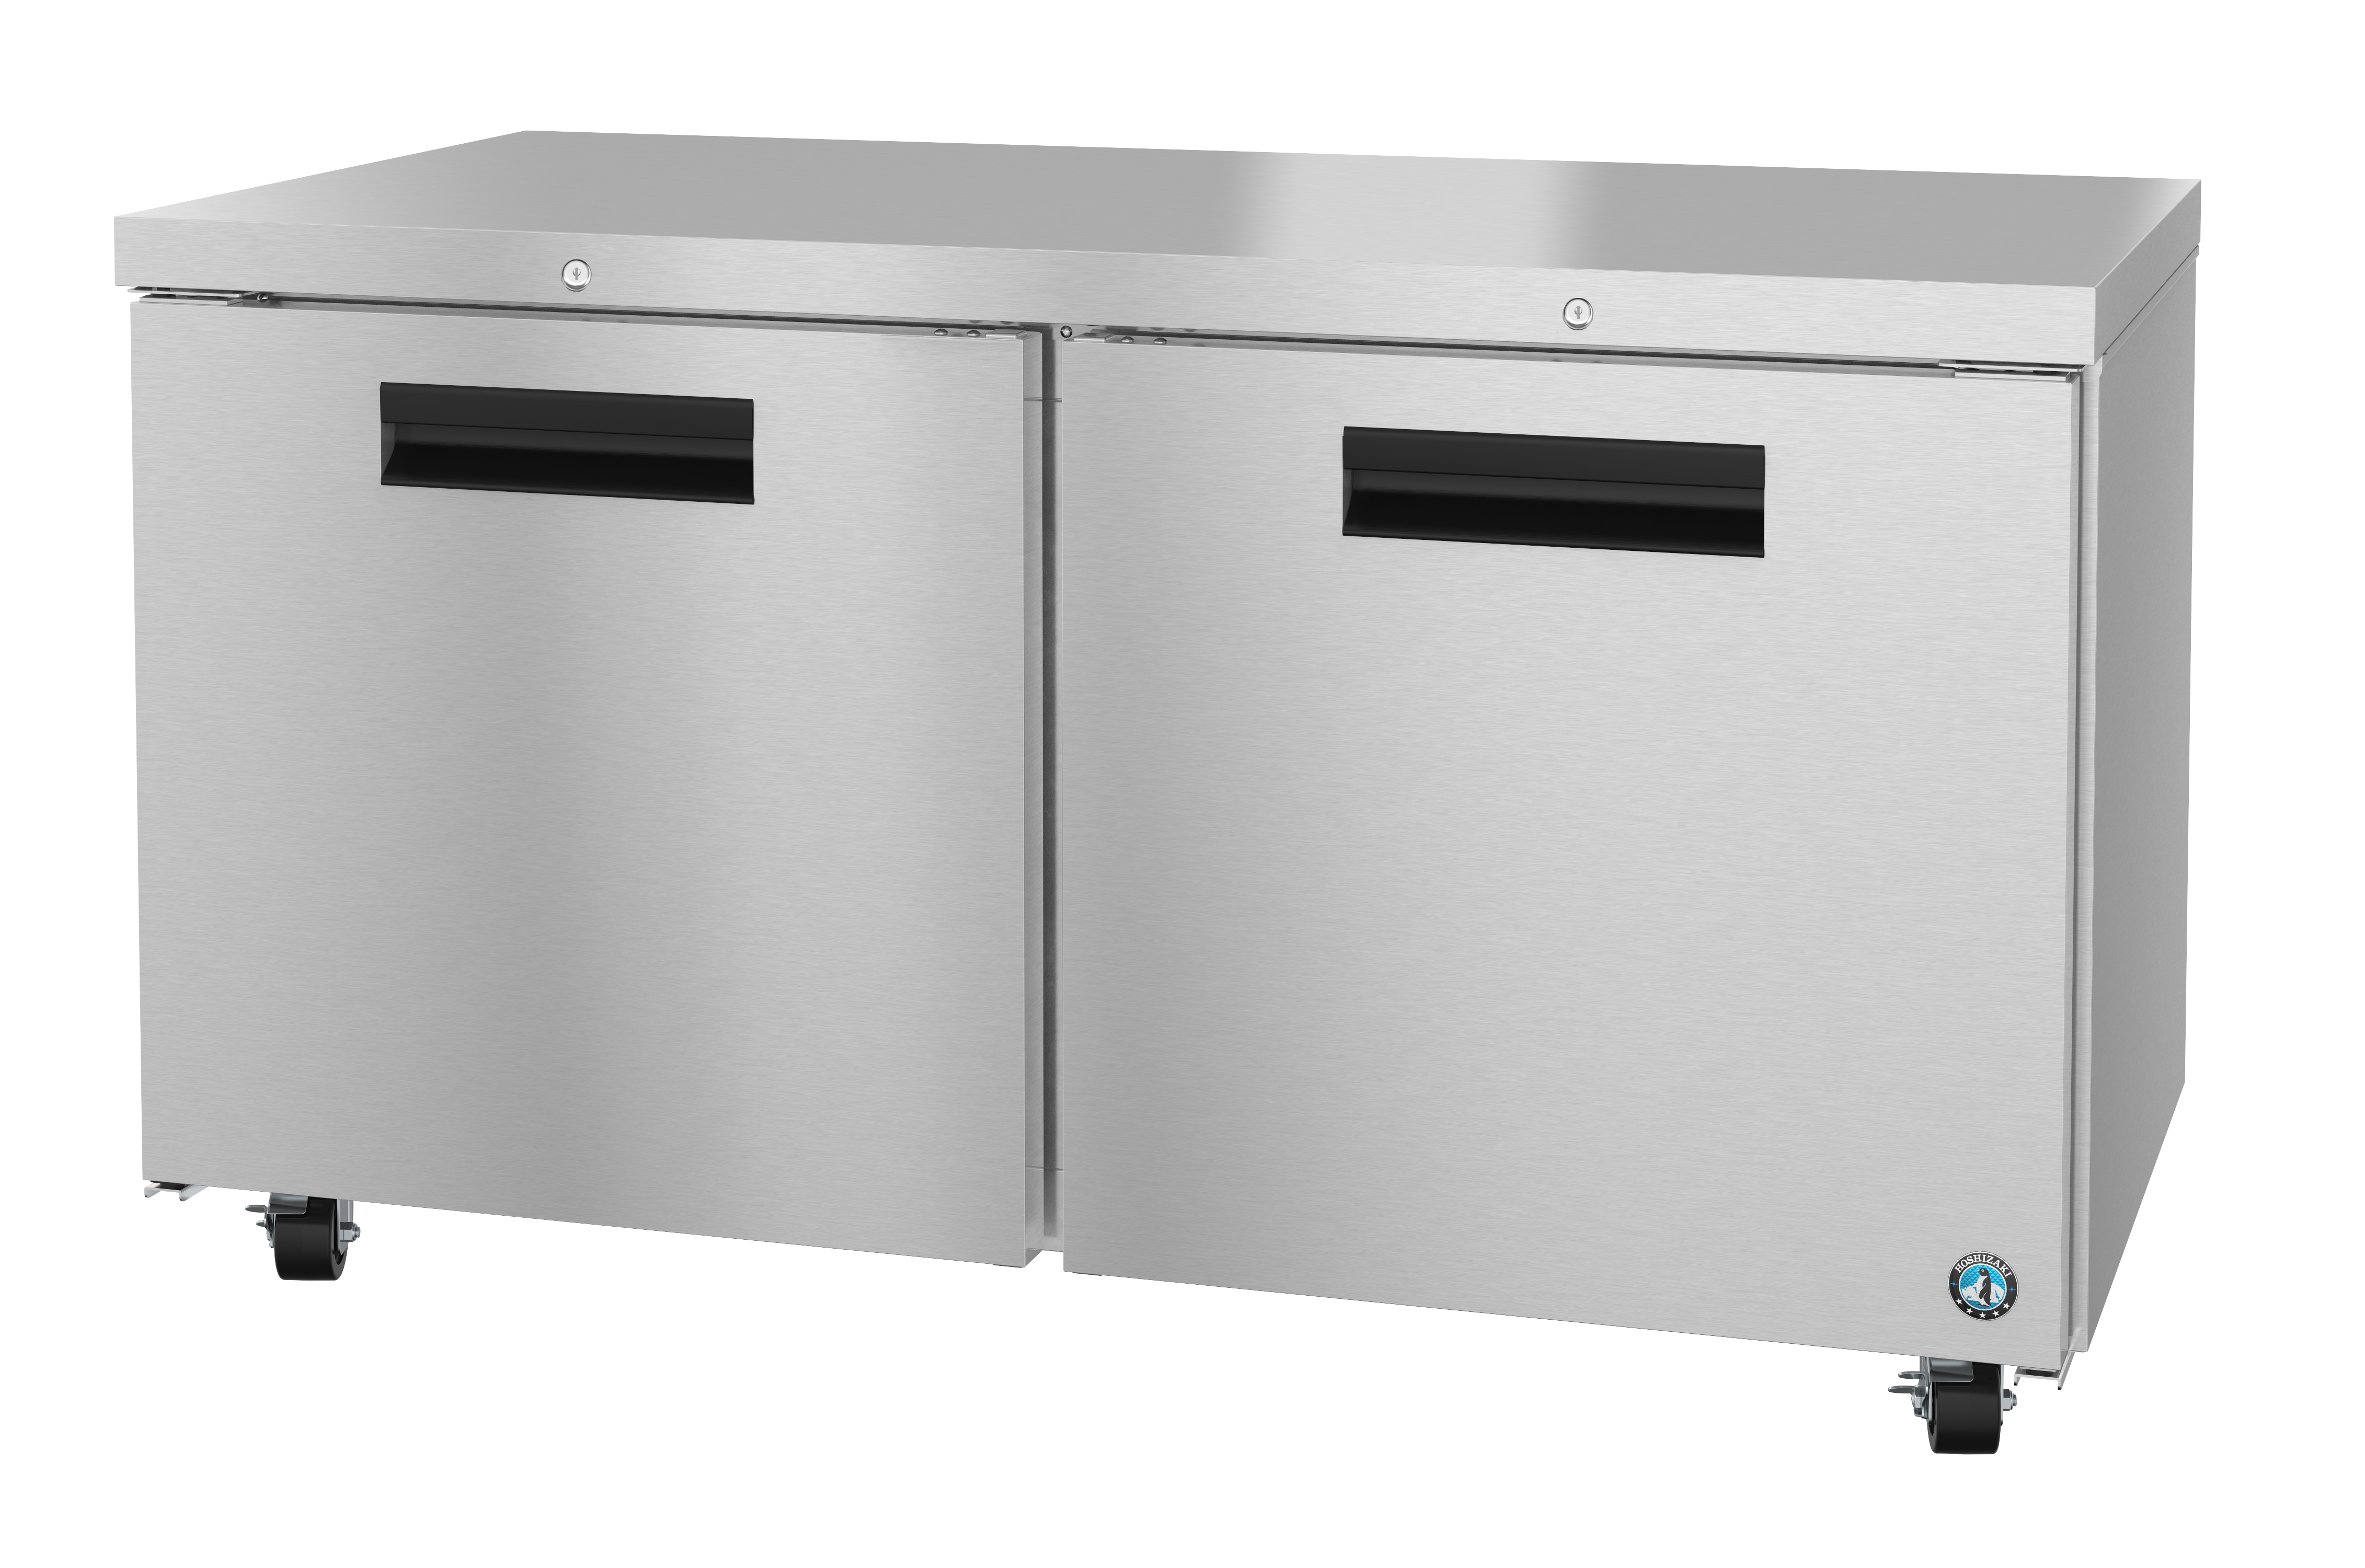 CRMR60-01, Refrigerator, Two Section Undercounter, Stainless Doors with Lock